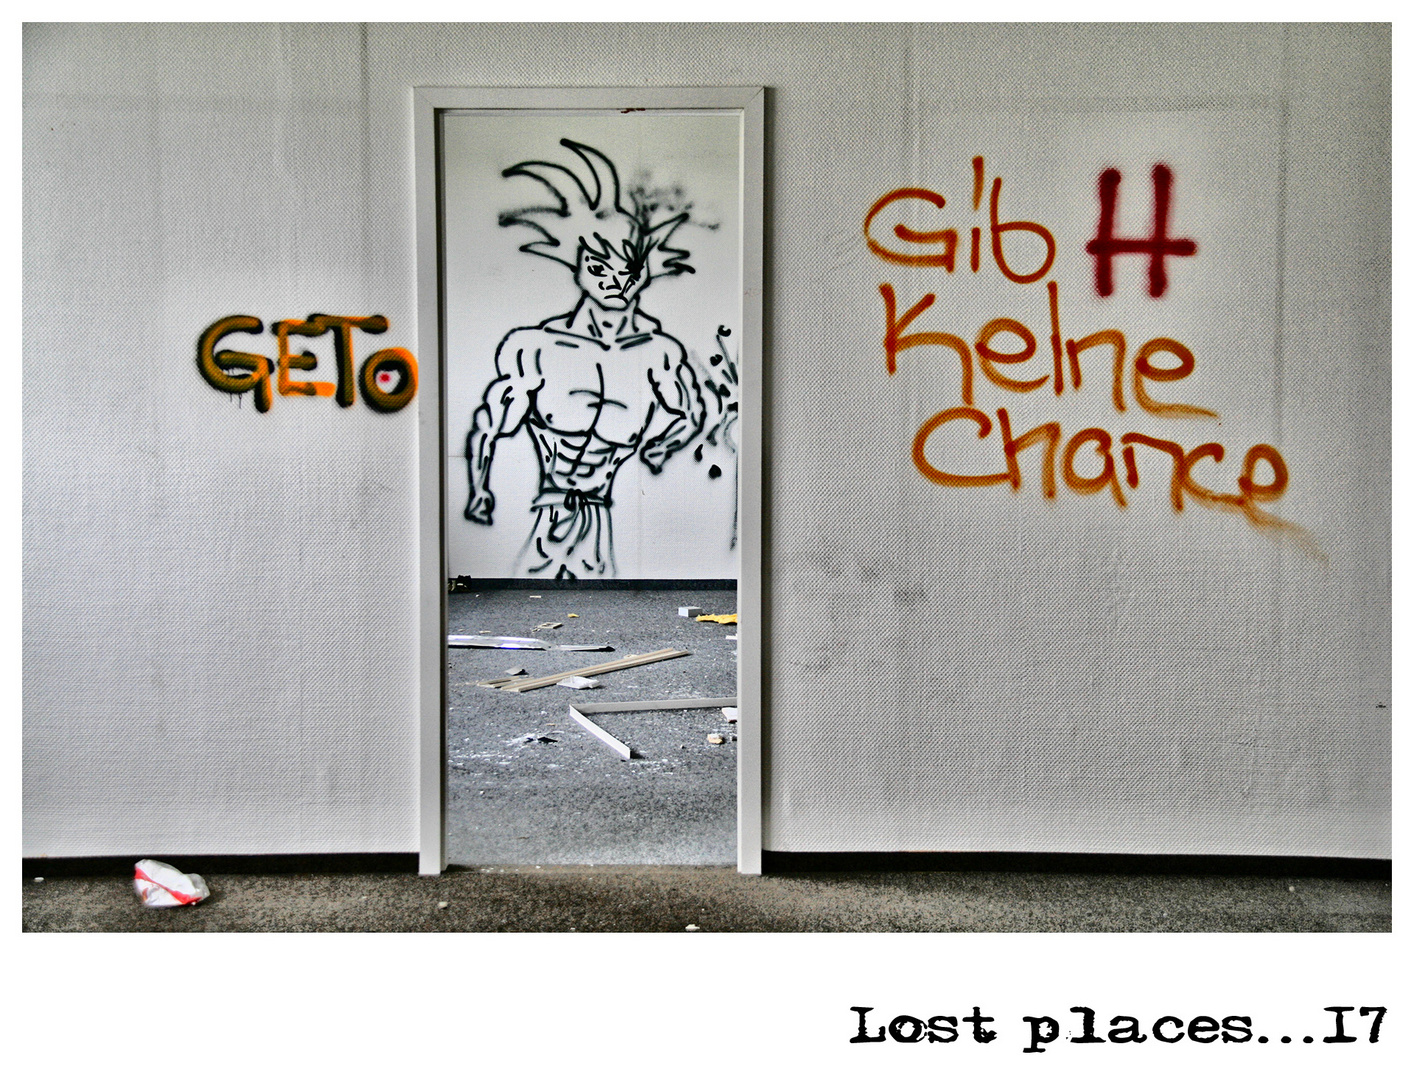 Lost places...17